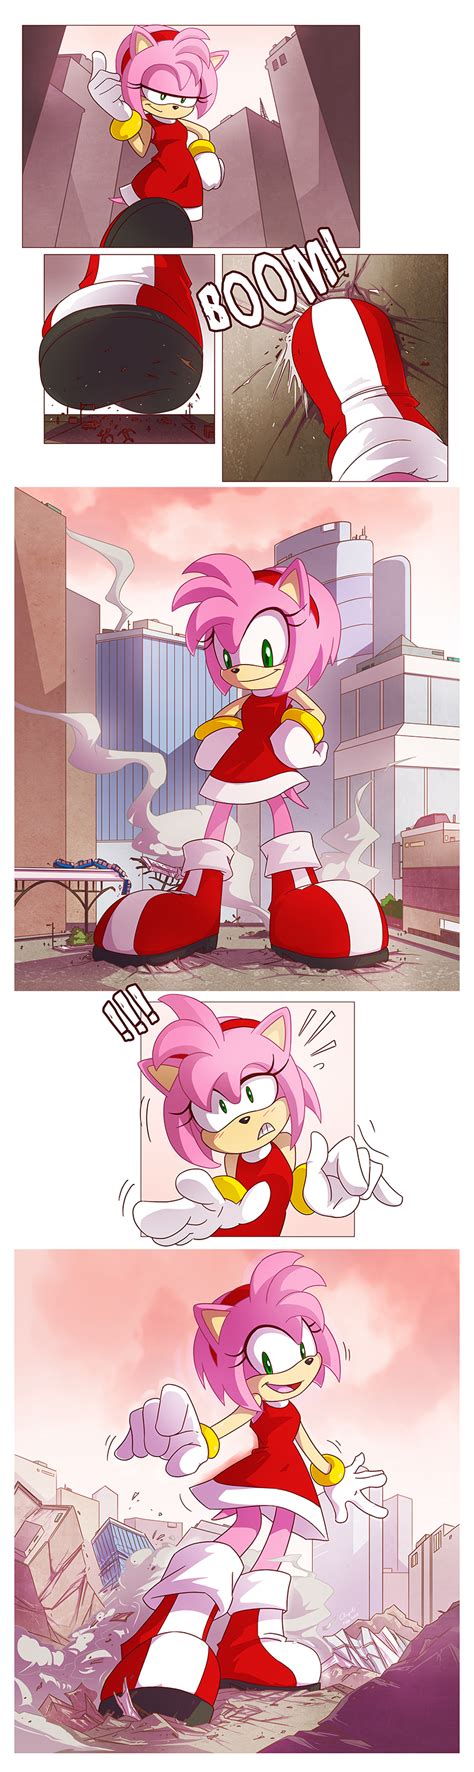 [comm] amy rose grows by angelgts on deviantart